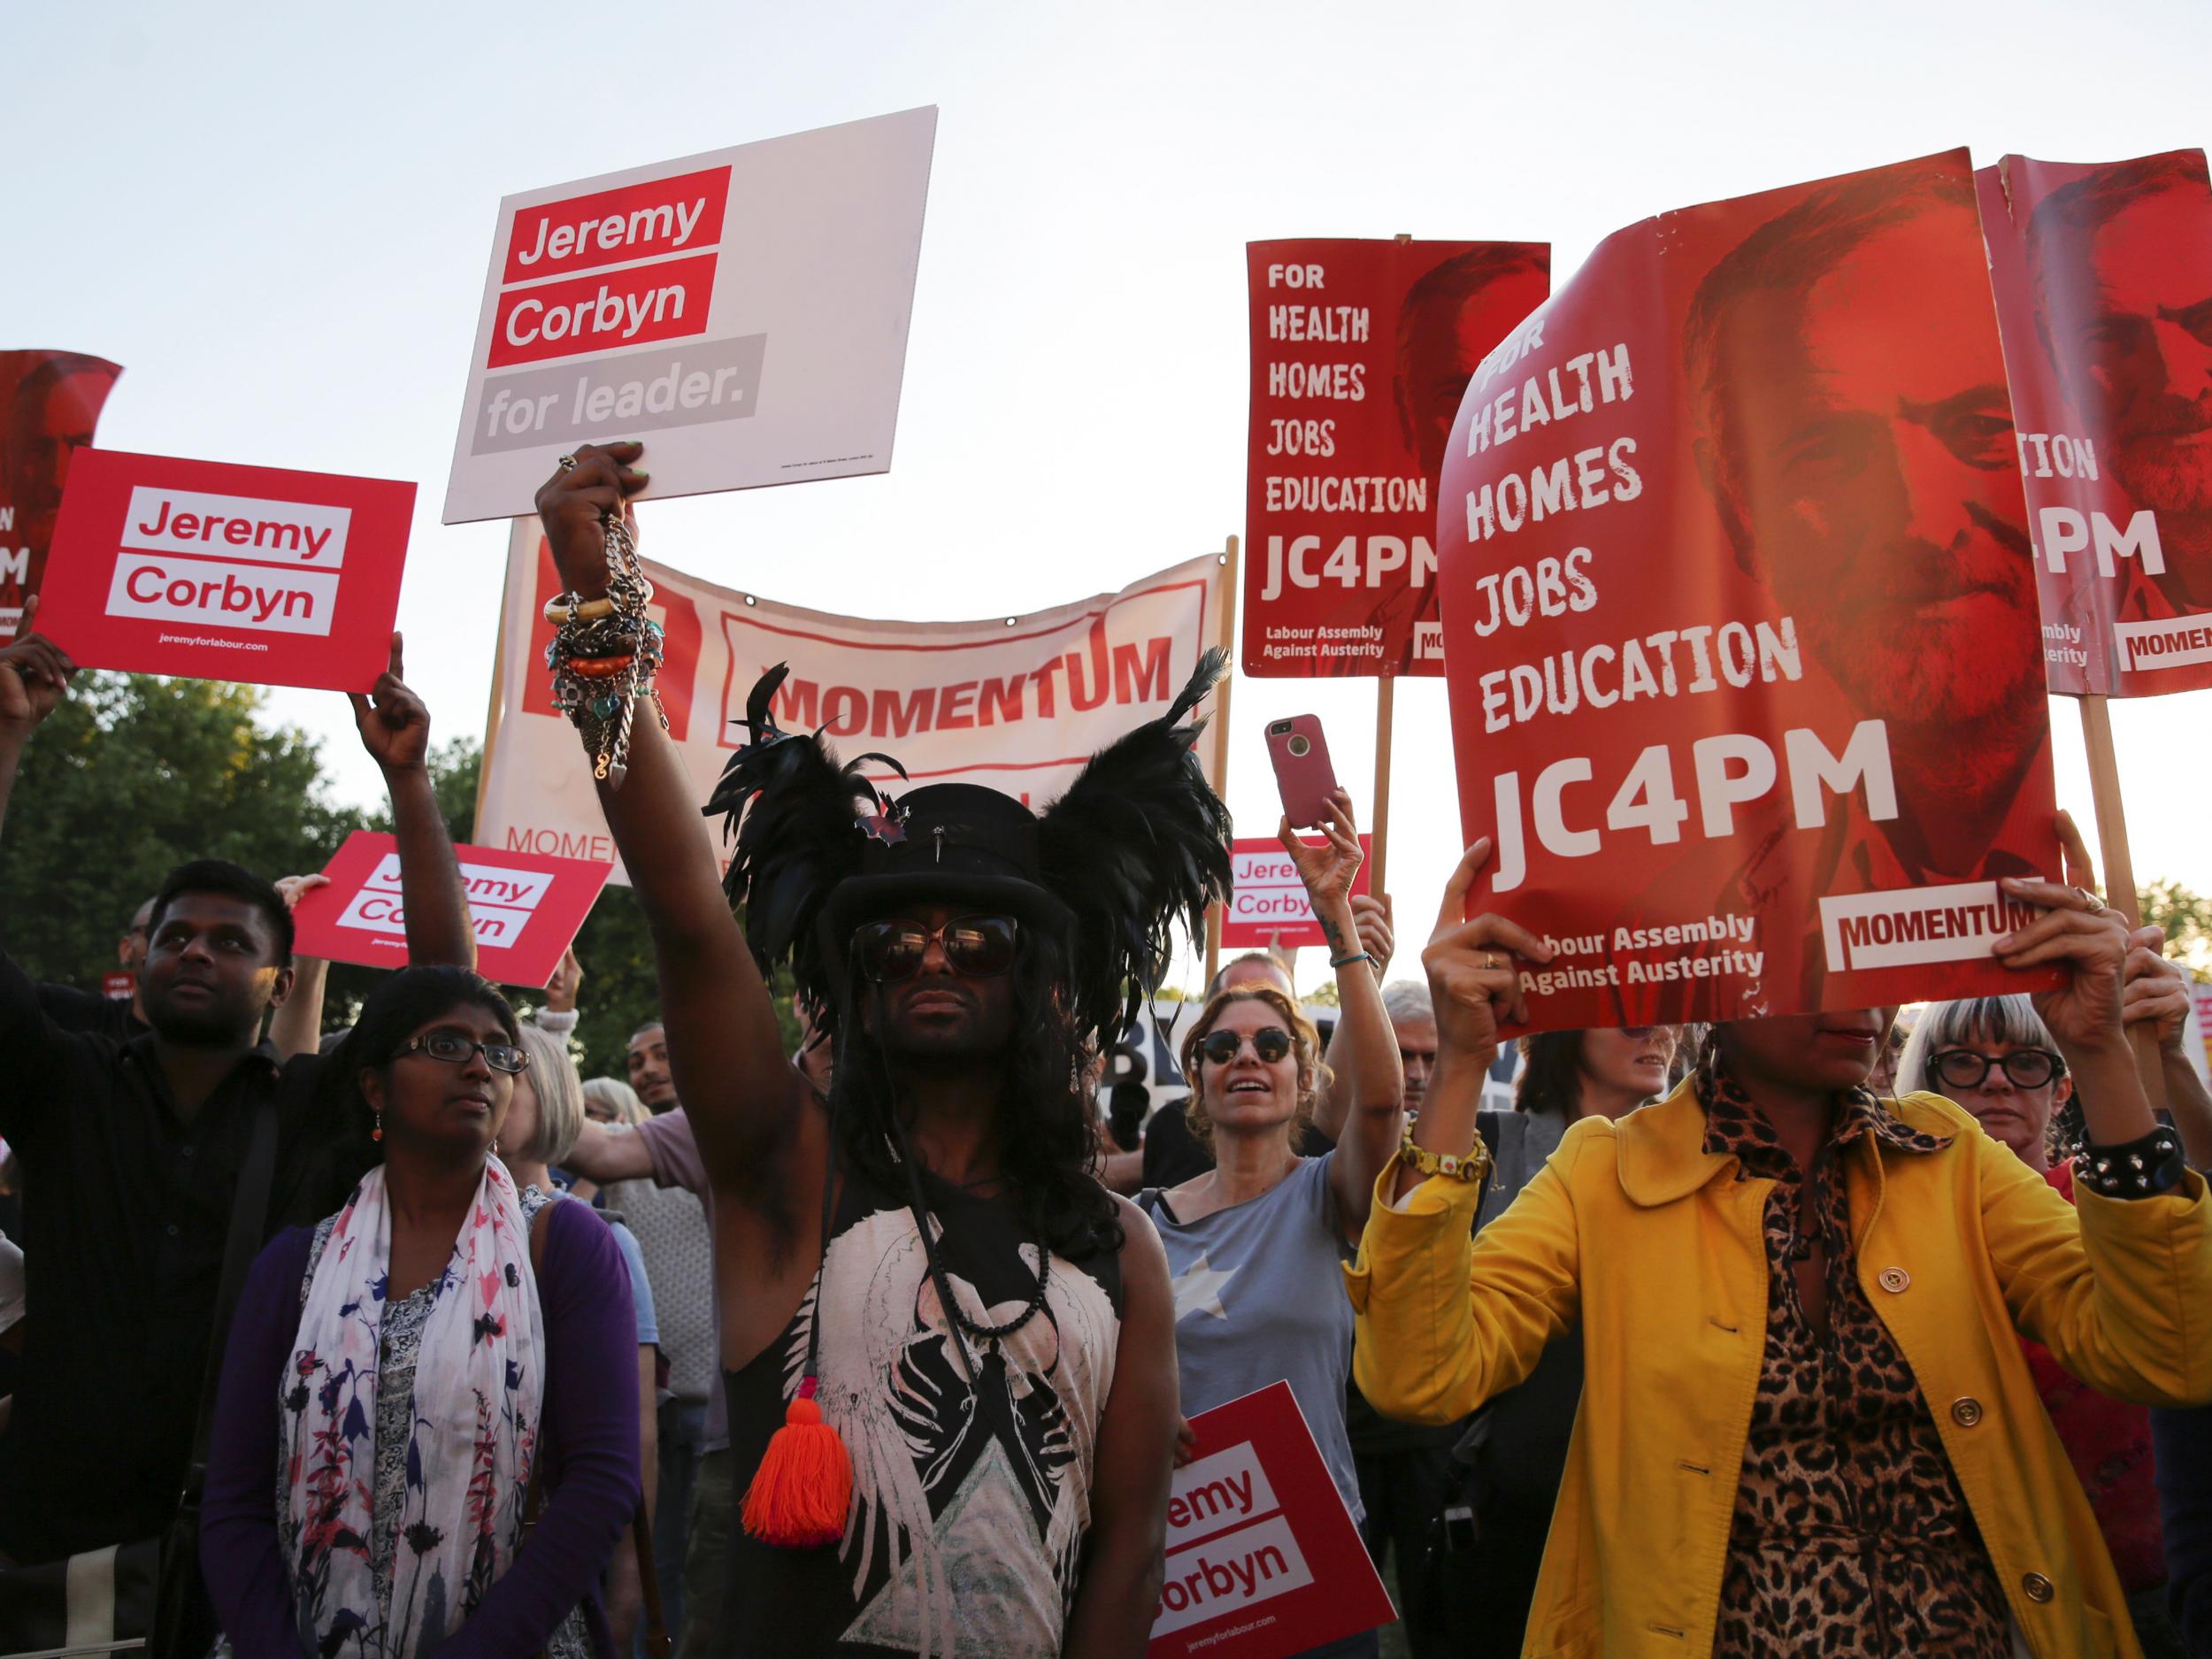 Momentum supporters at a Black, Asian and minority ethnic (BAME) rally in north London